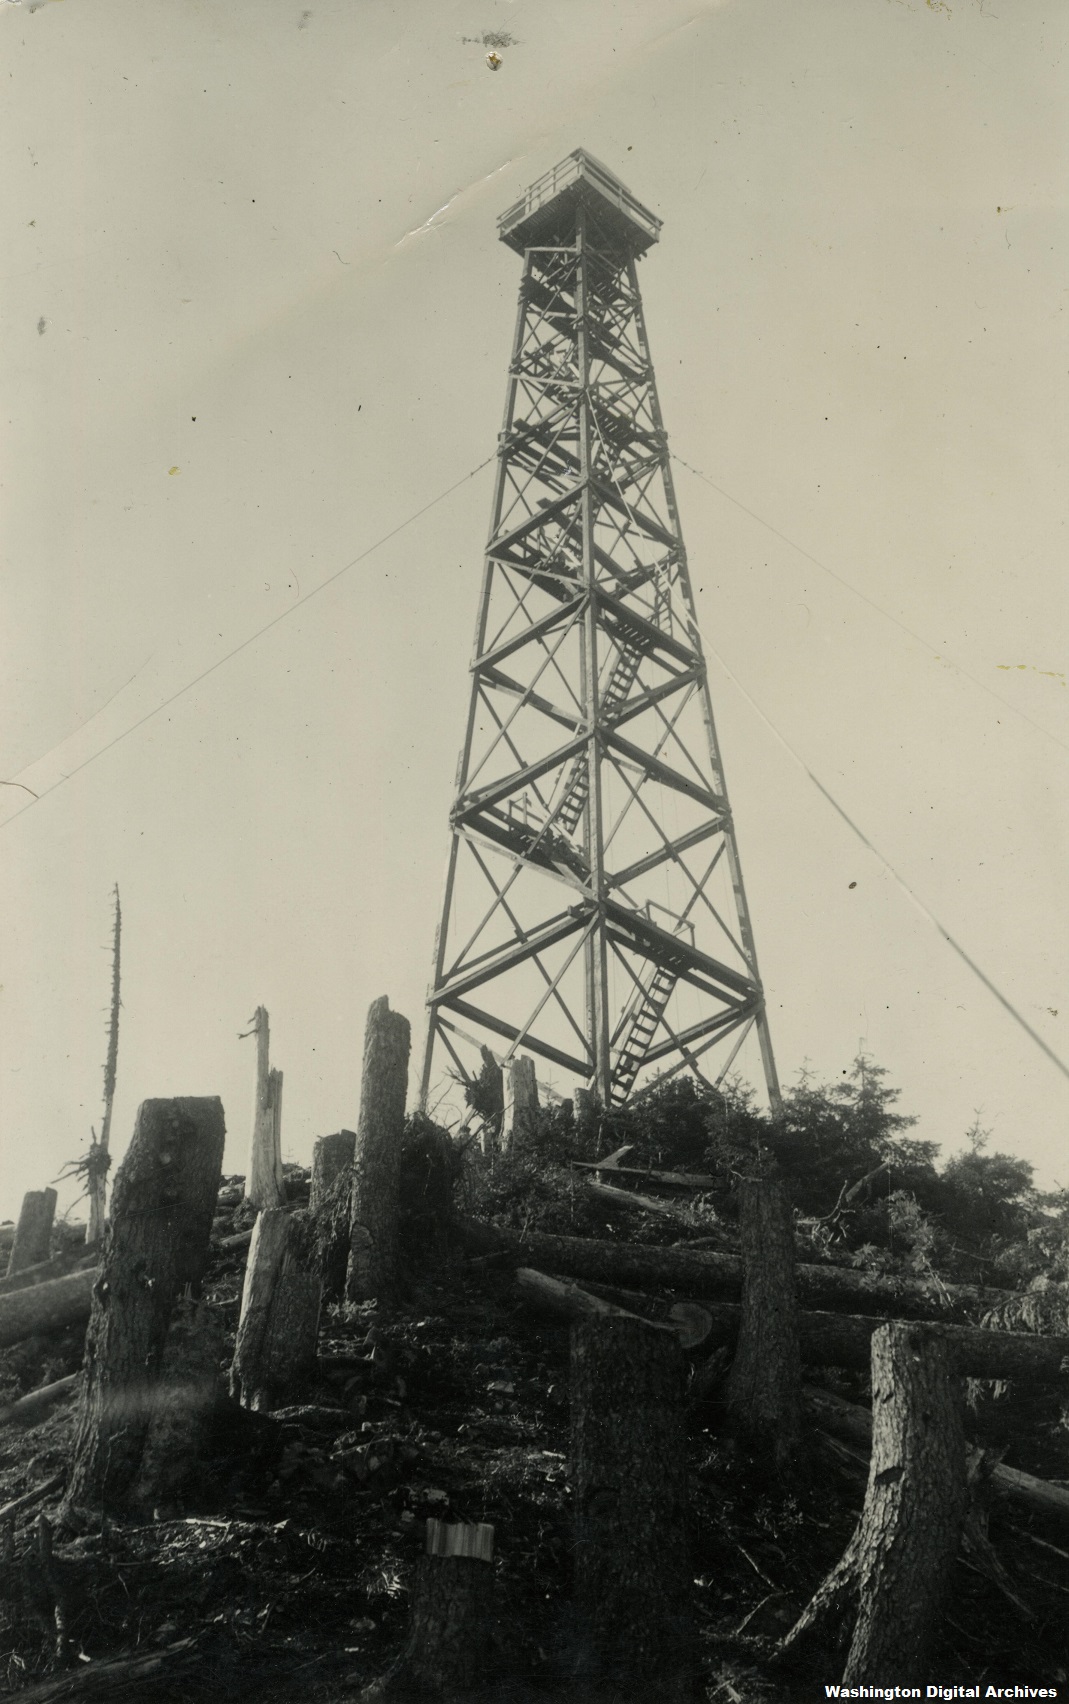 Grass Mtn. in the 1930s